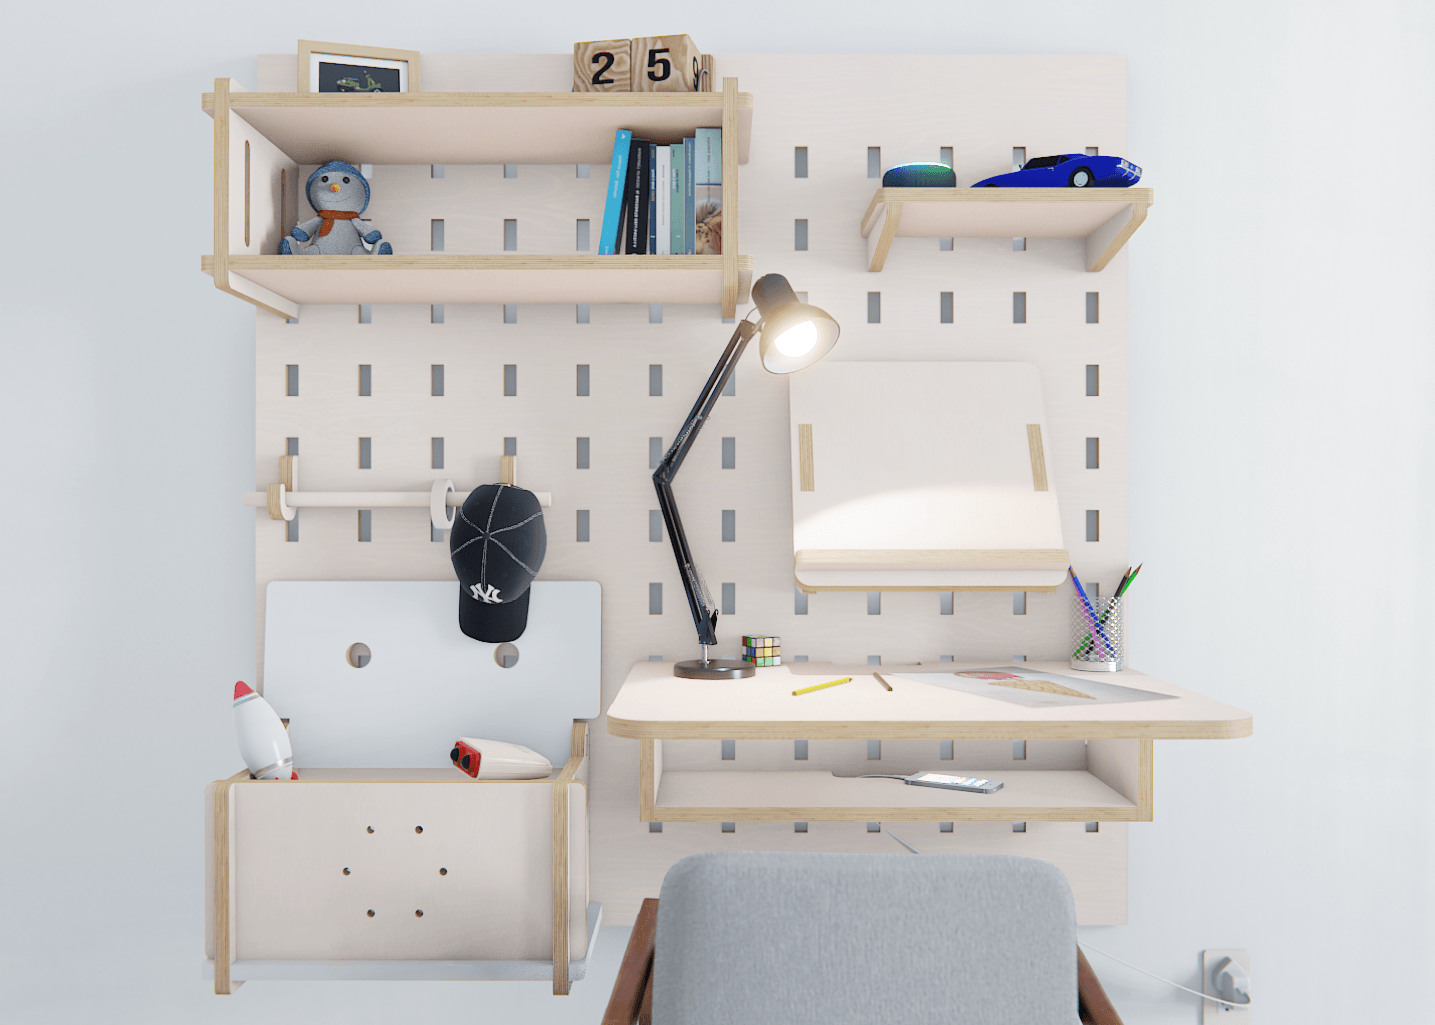 Maximize efficiency with our versatile book/iPad shelf for pegboards. A storage solution that adapts to you.